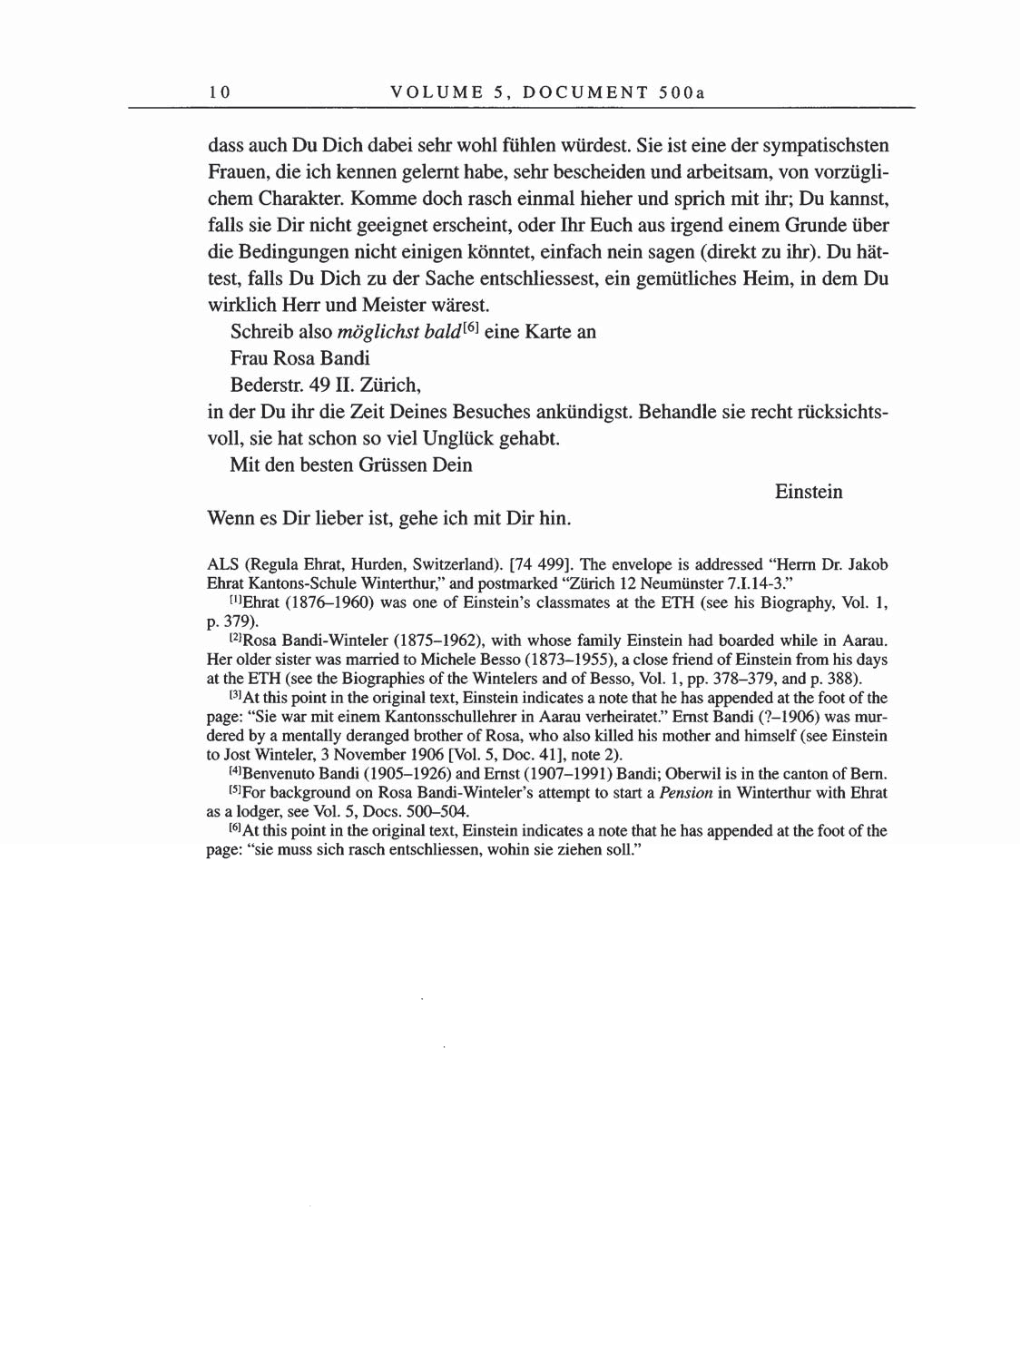 Volume 8, Part A: The Berlin Years: Correspondence 1914-1917 page 10